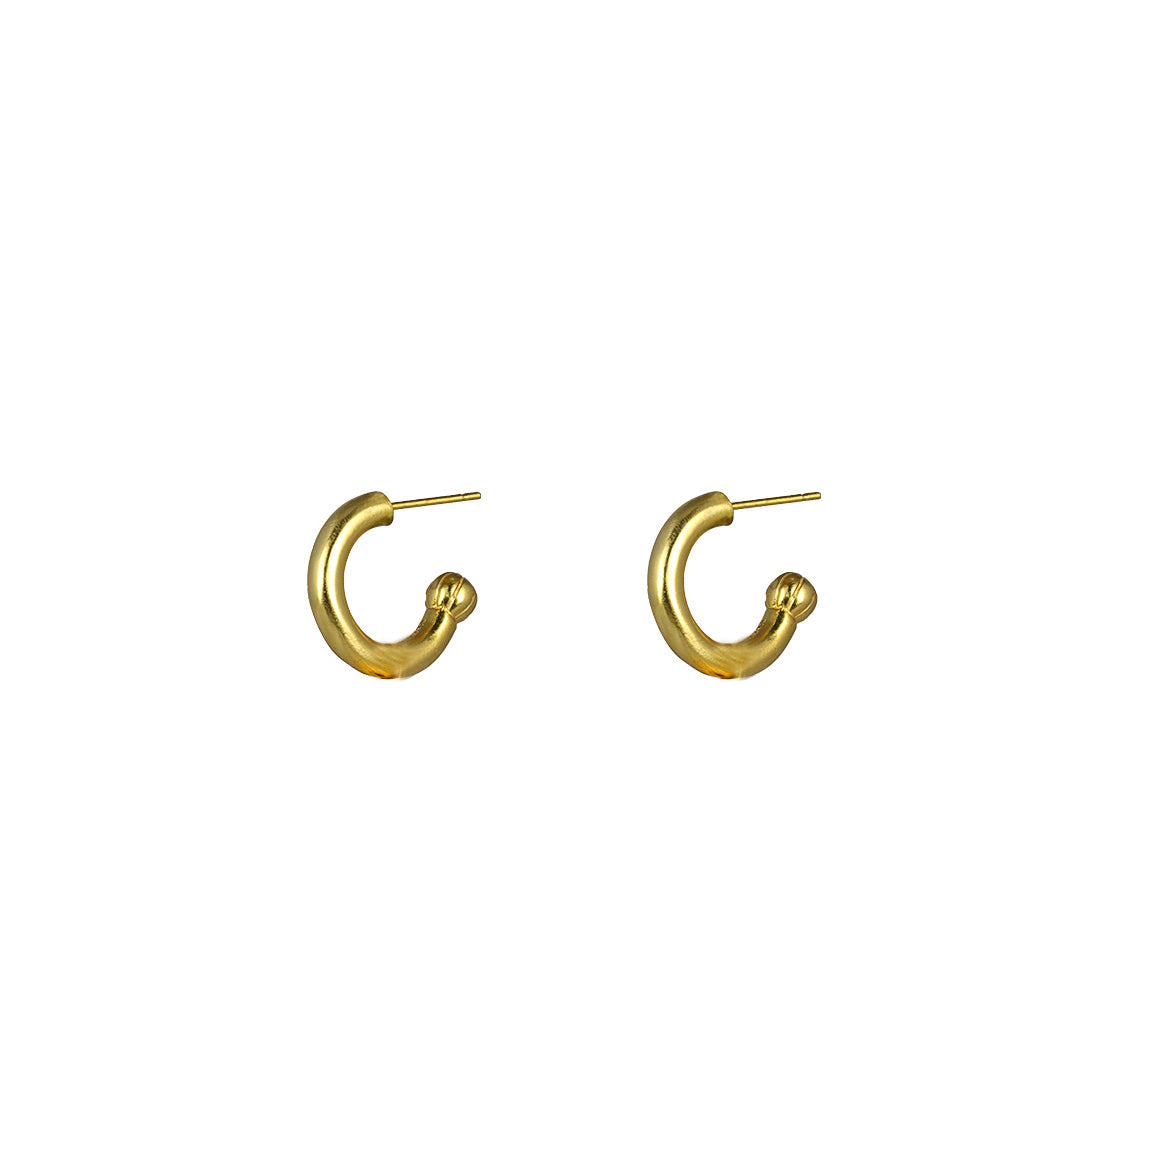 Anahita Earrings Pearl (2 in 1 with removable charm)